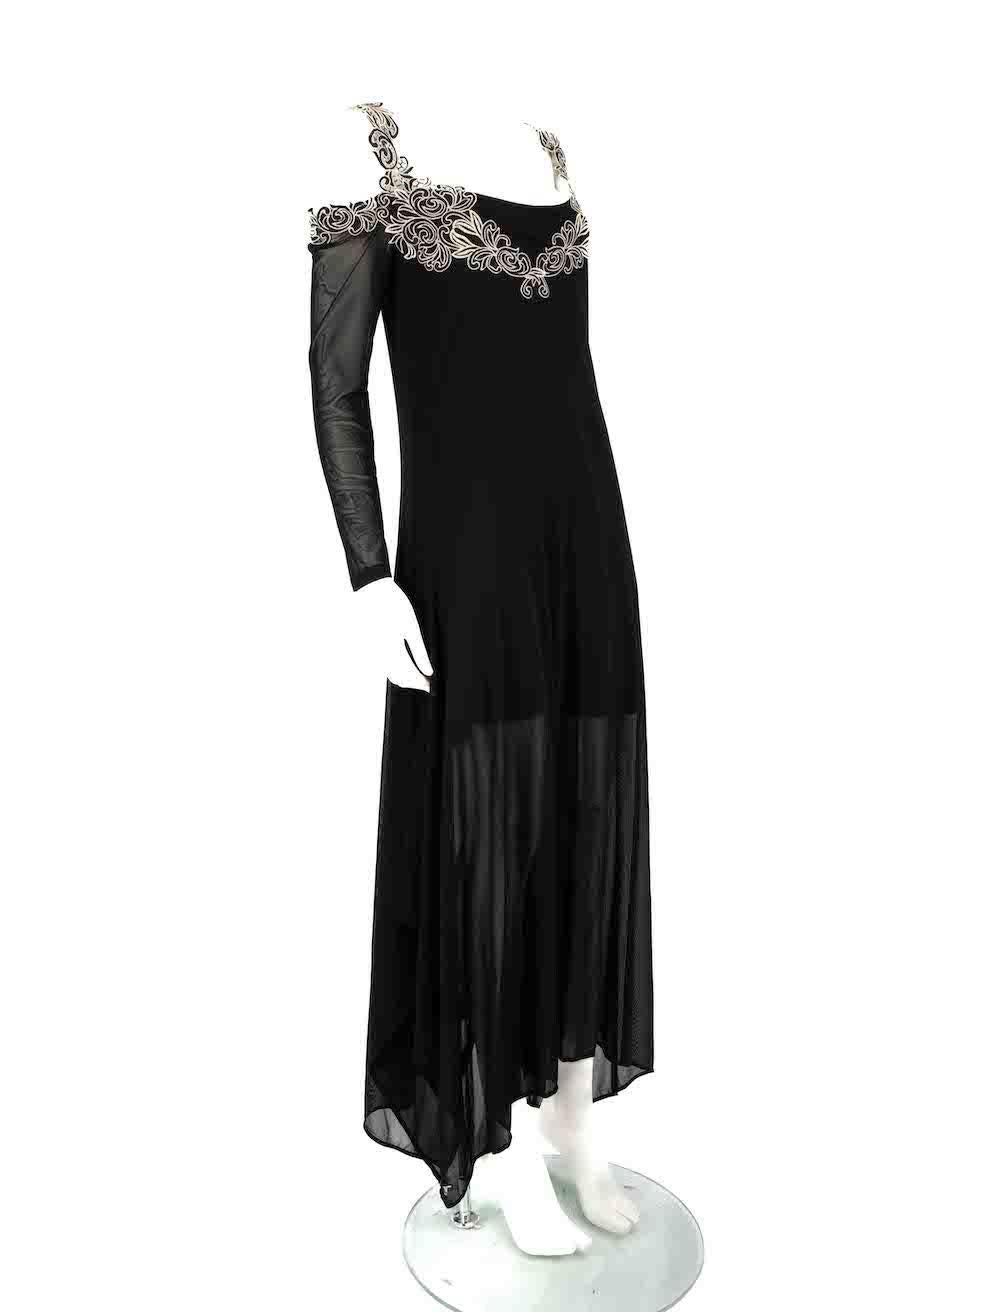 CONDITION is Never worn, with tags. No visible wear to dress is evident on this new Anne Fontaine designer resale item.
 
 
 
 Details
 
 
 Black
 
 Synthetic
 
 Dress
 
 Maxi
 
 Round neck
 
 Long sheer sleeves
 
 Lace trim detail
 
 Stretchy
 
 
